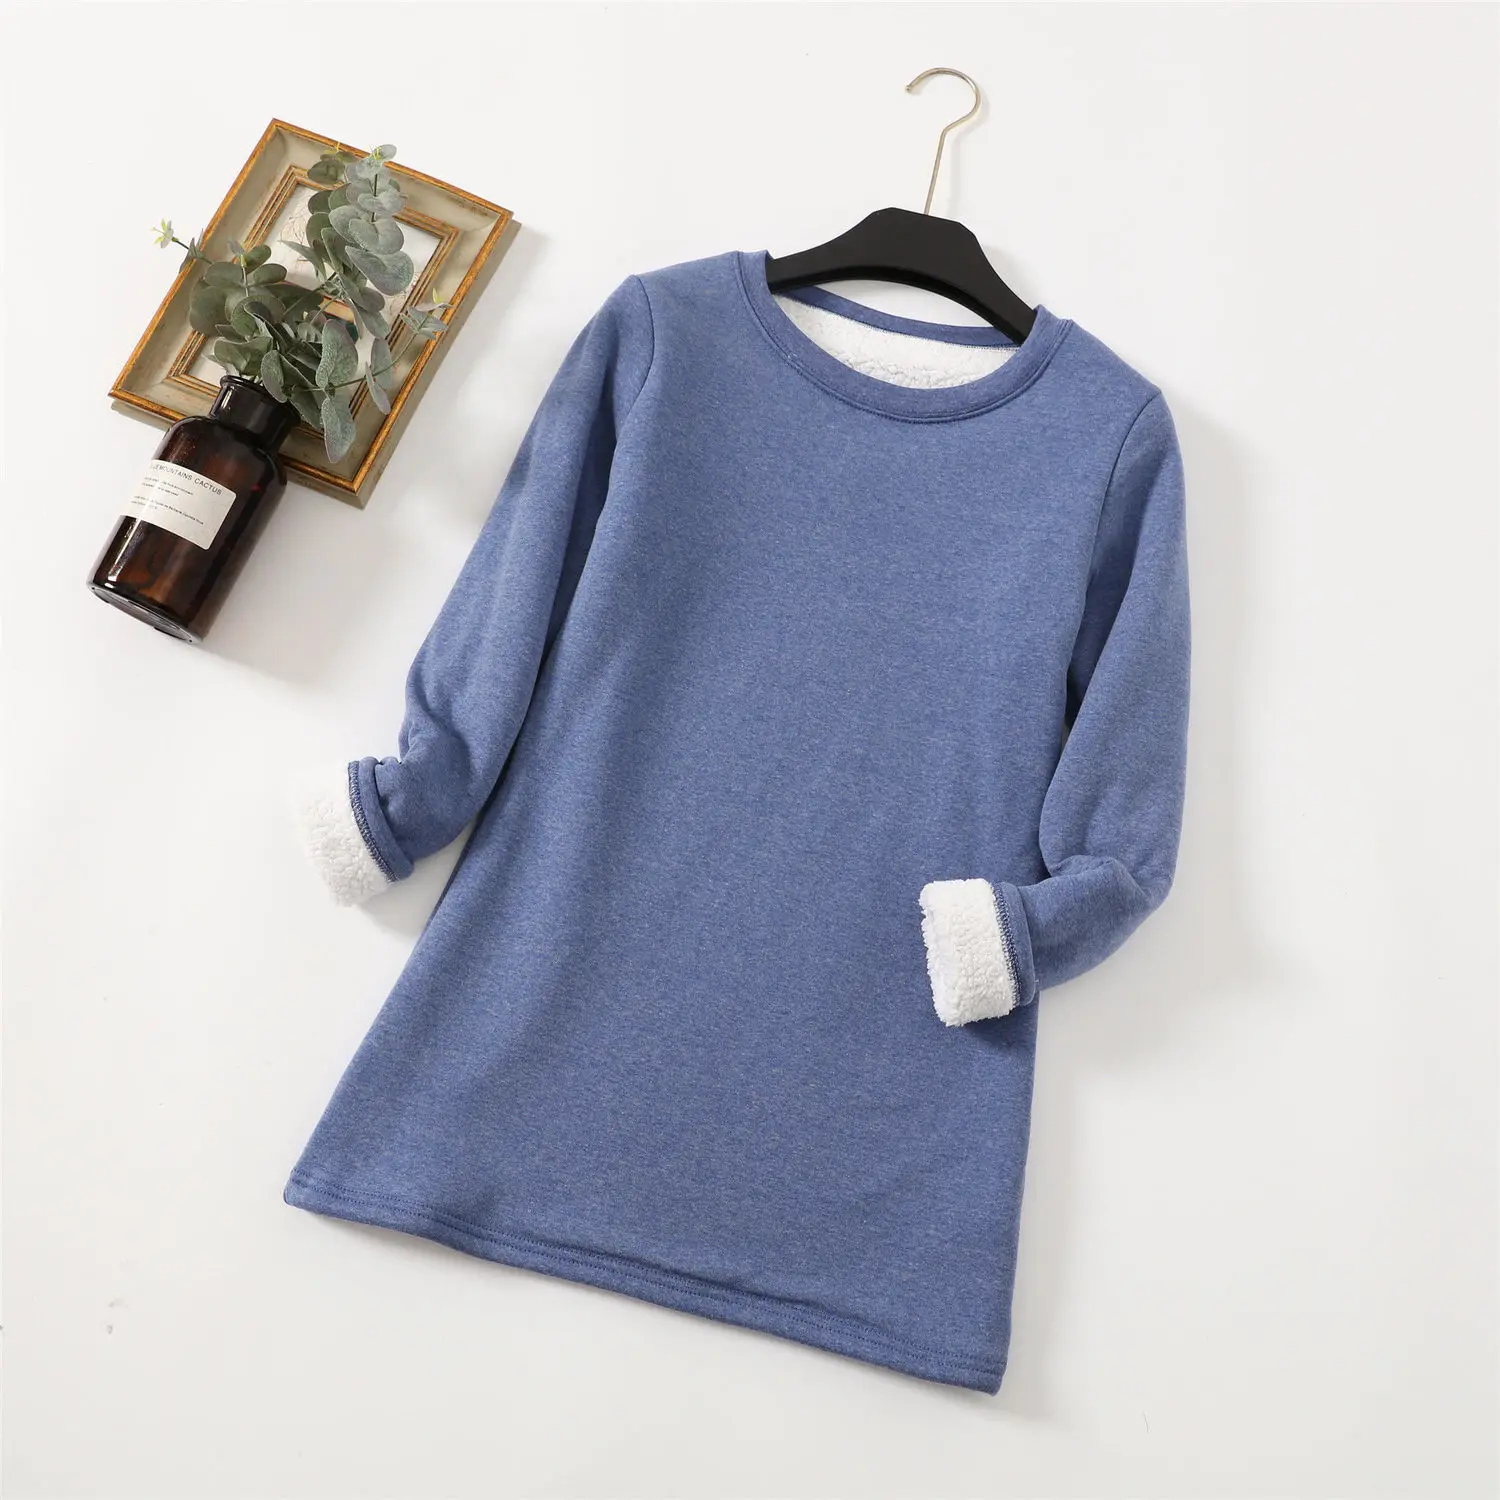 Autumn and winter new medium and long velvet bottoming shirt T-shirt thickened cotton fleece sweater slim fit warm top